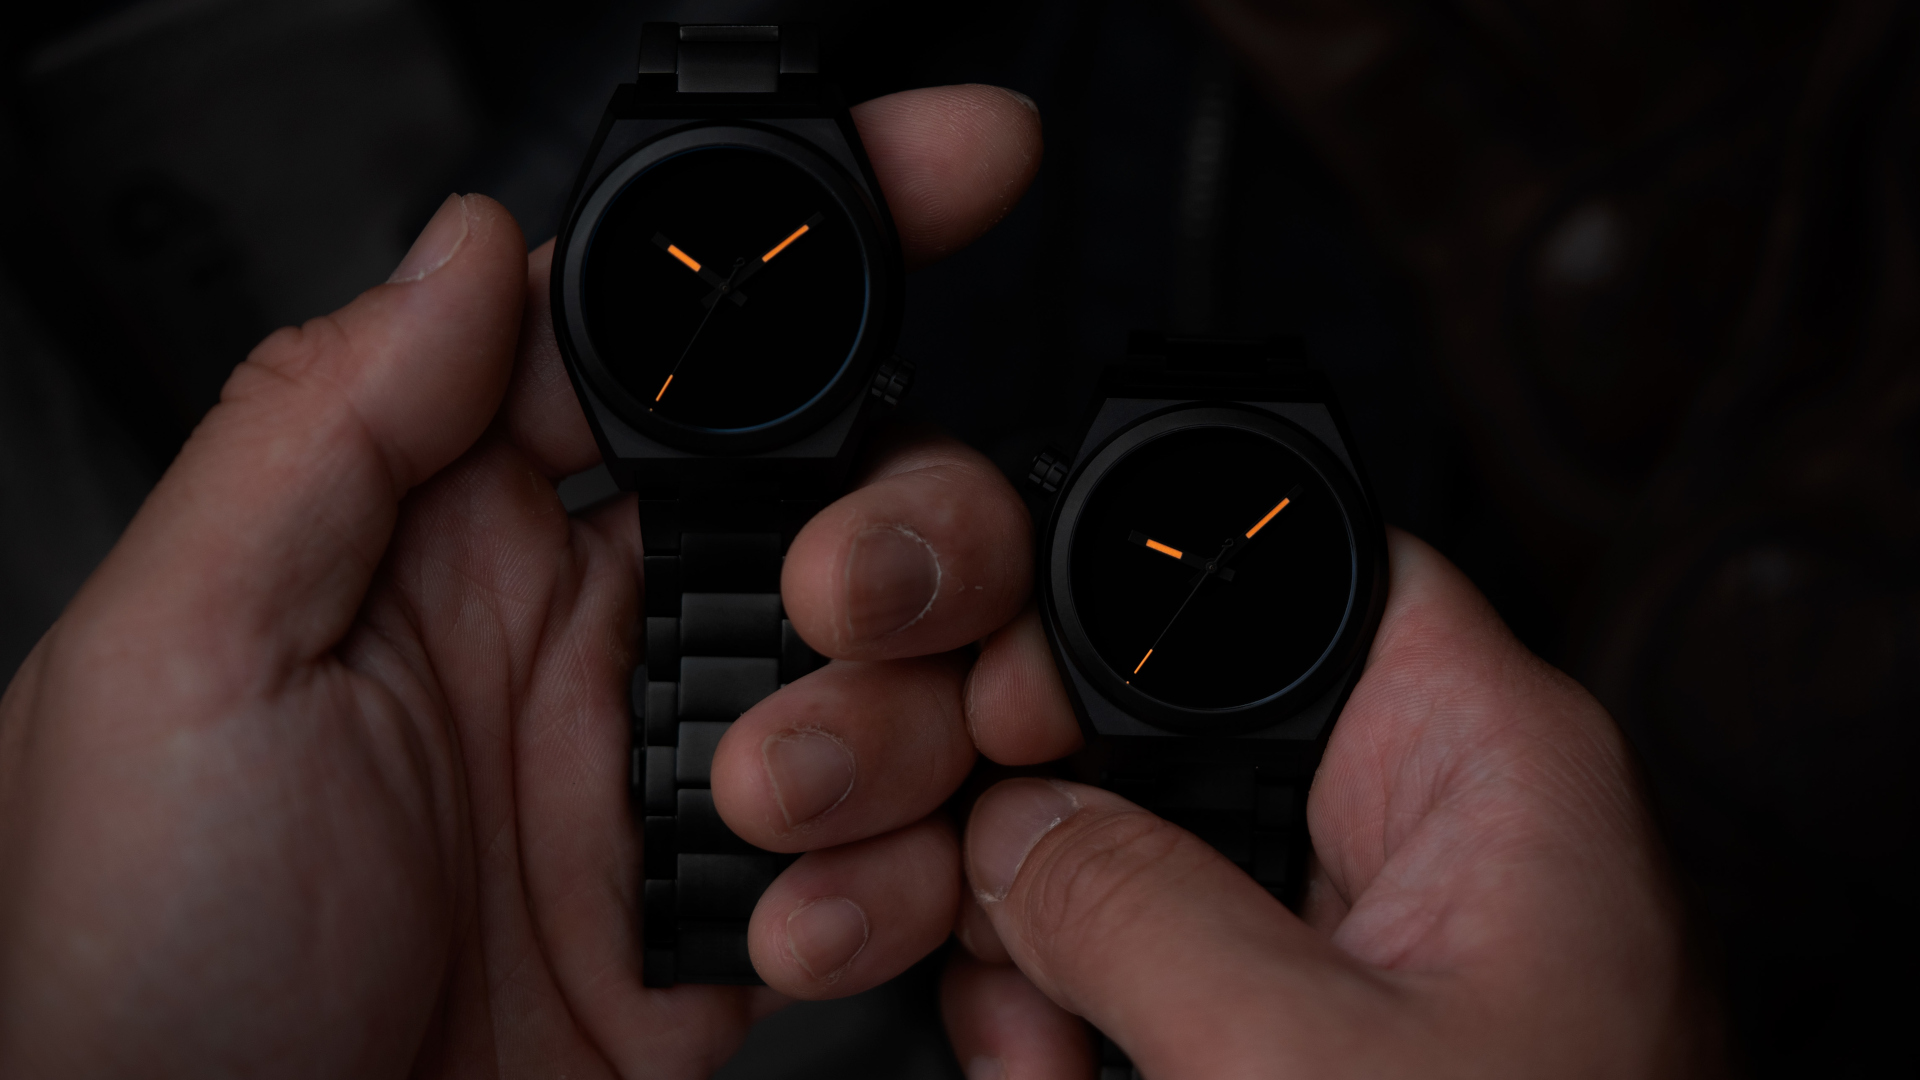 Venture Singularity: To Boldr Go Where No Other Watch Brand Has Gone Before